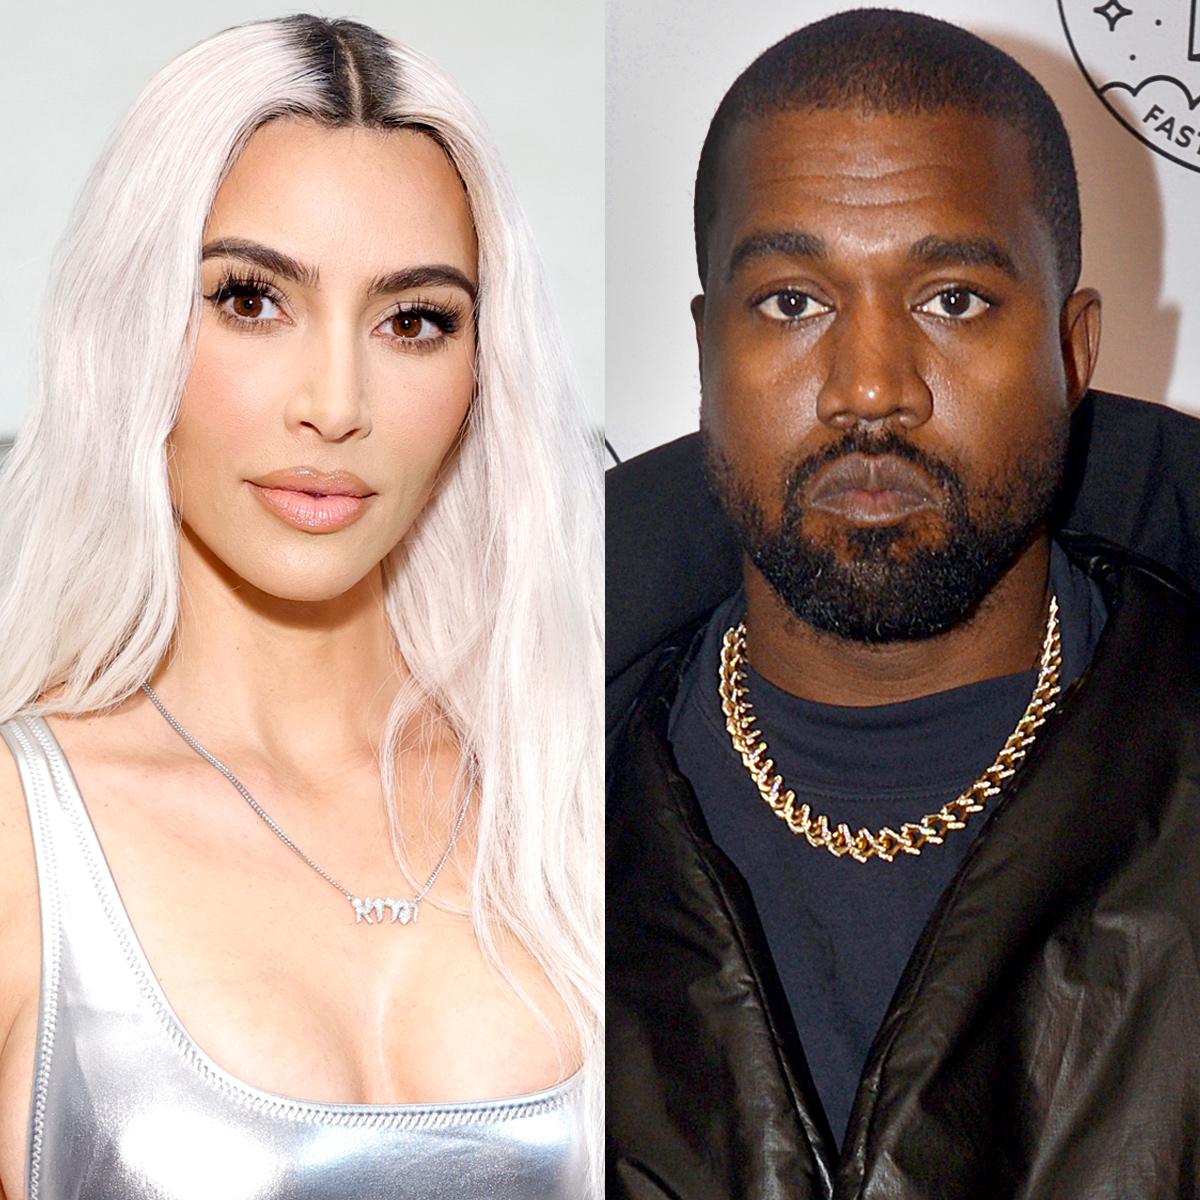 Tearful Kim Kardashian Says Co-Parenting With Kanye West Is “Really F–king Hard” – E! Online